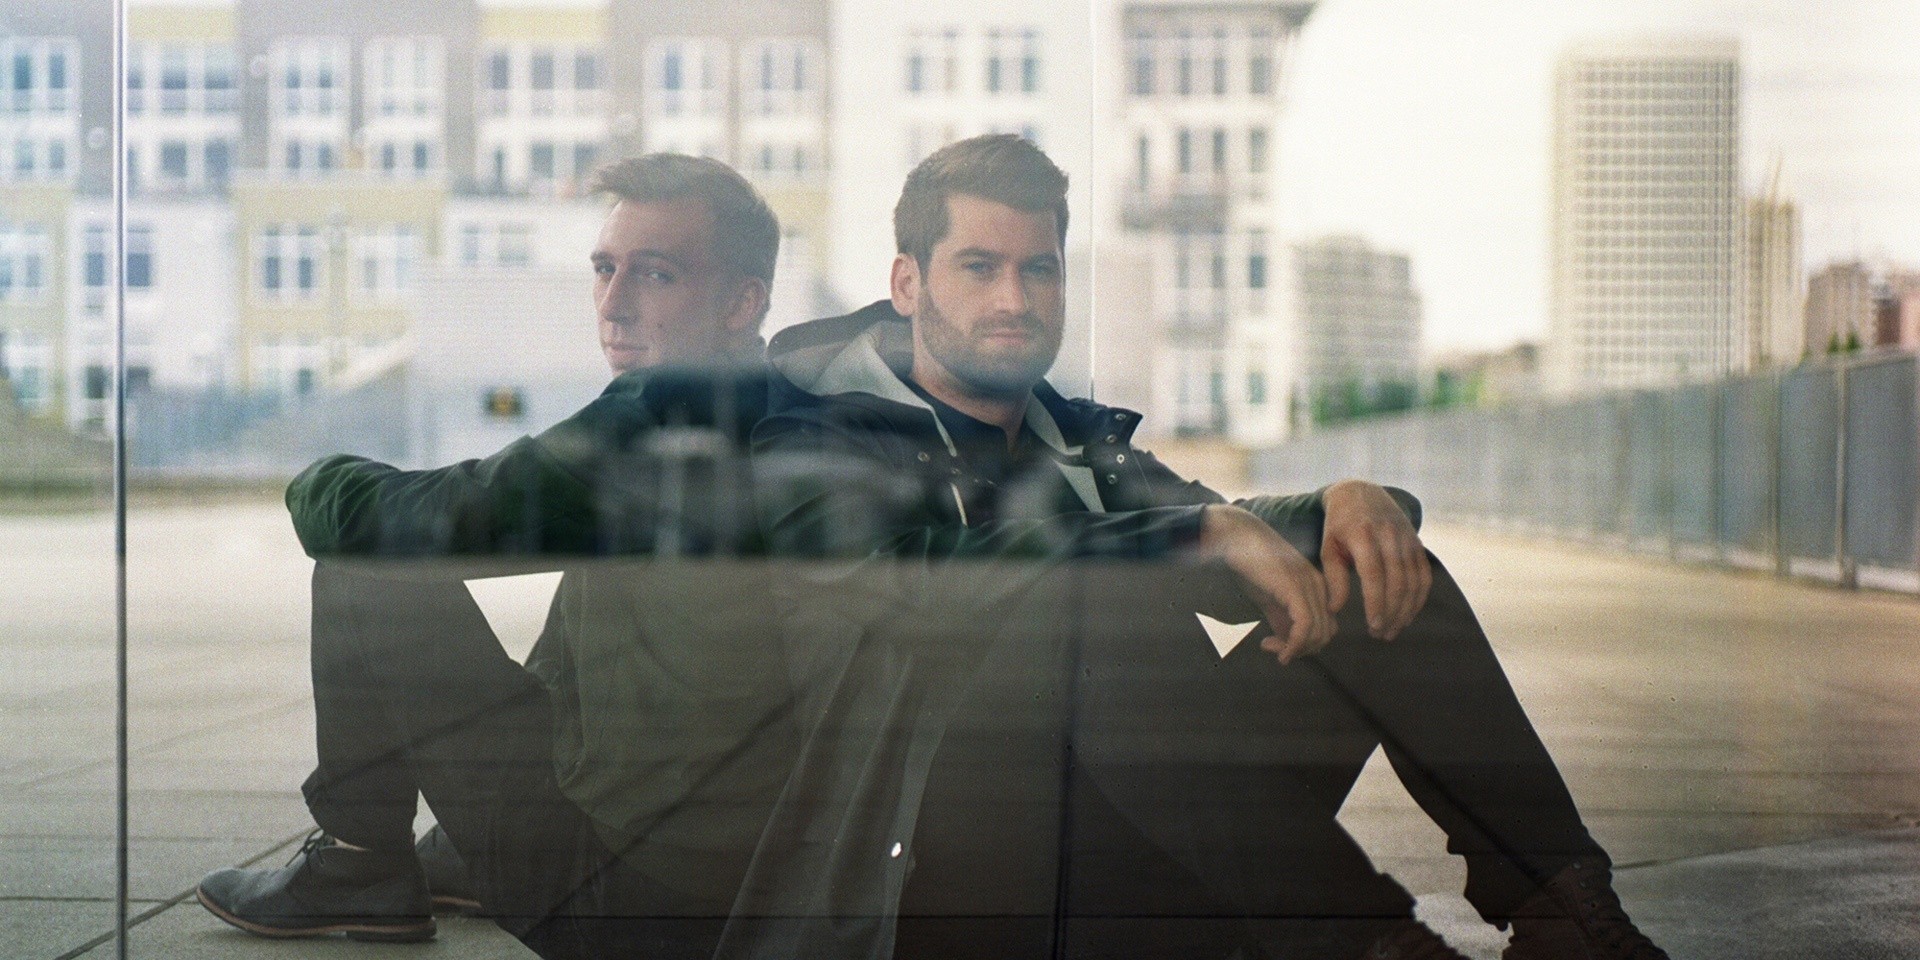 ODESZA to perform in Singapore for the first time in July